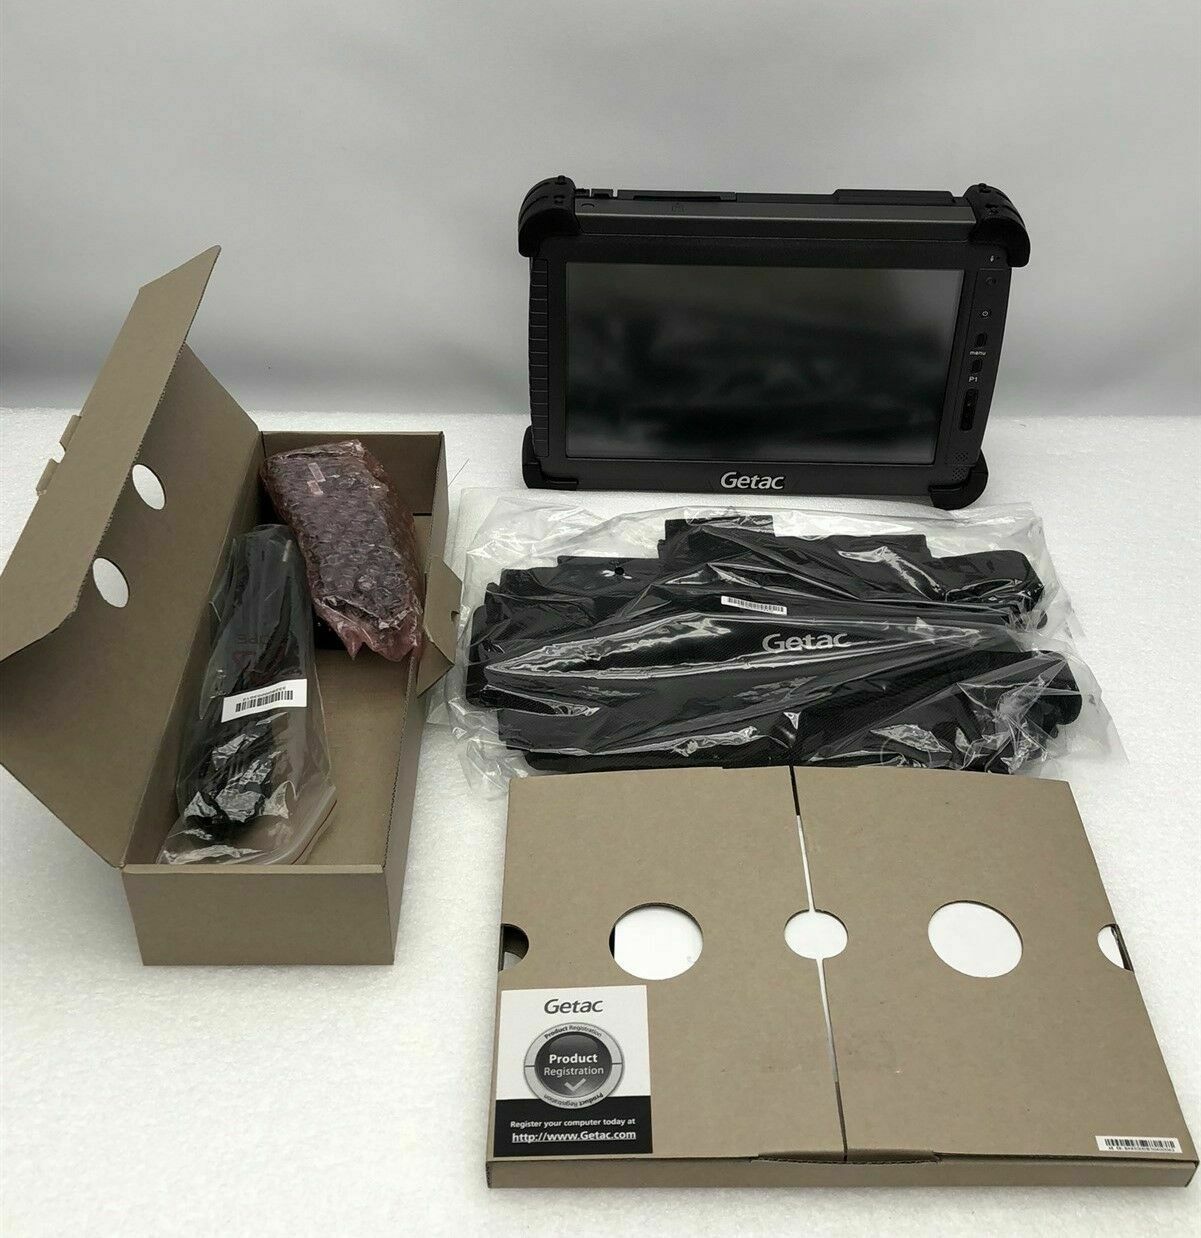 GETAC RUGGED TABLET MODEL E110 ***NEW IN BOX WITH ACCESSORIES*** NICE!!